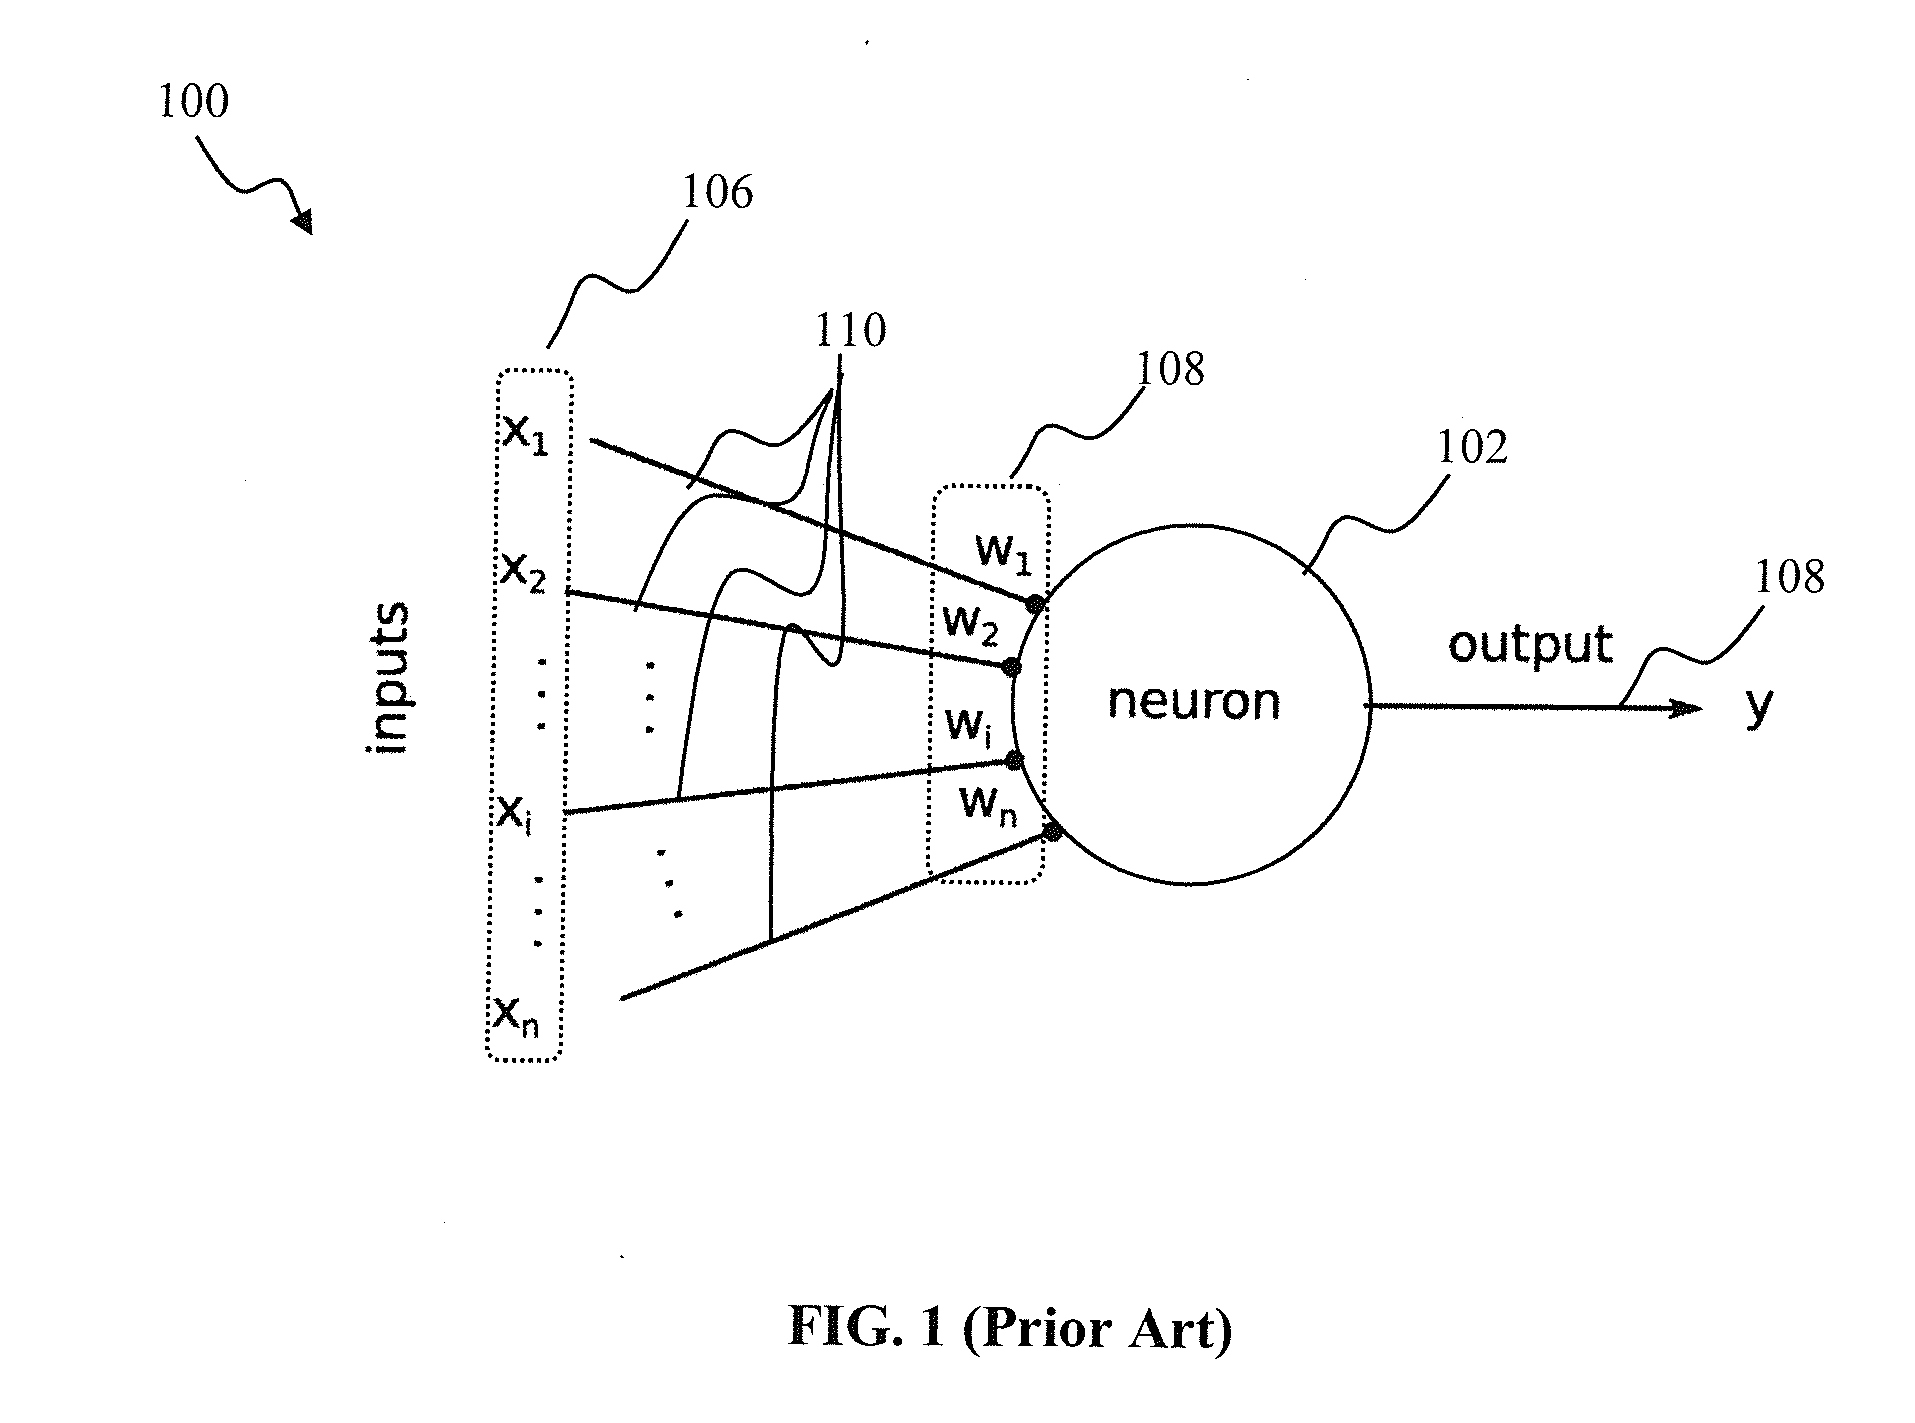 Apparatus and methods for implementing learning for analog and spiking signals in artificial neural networks